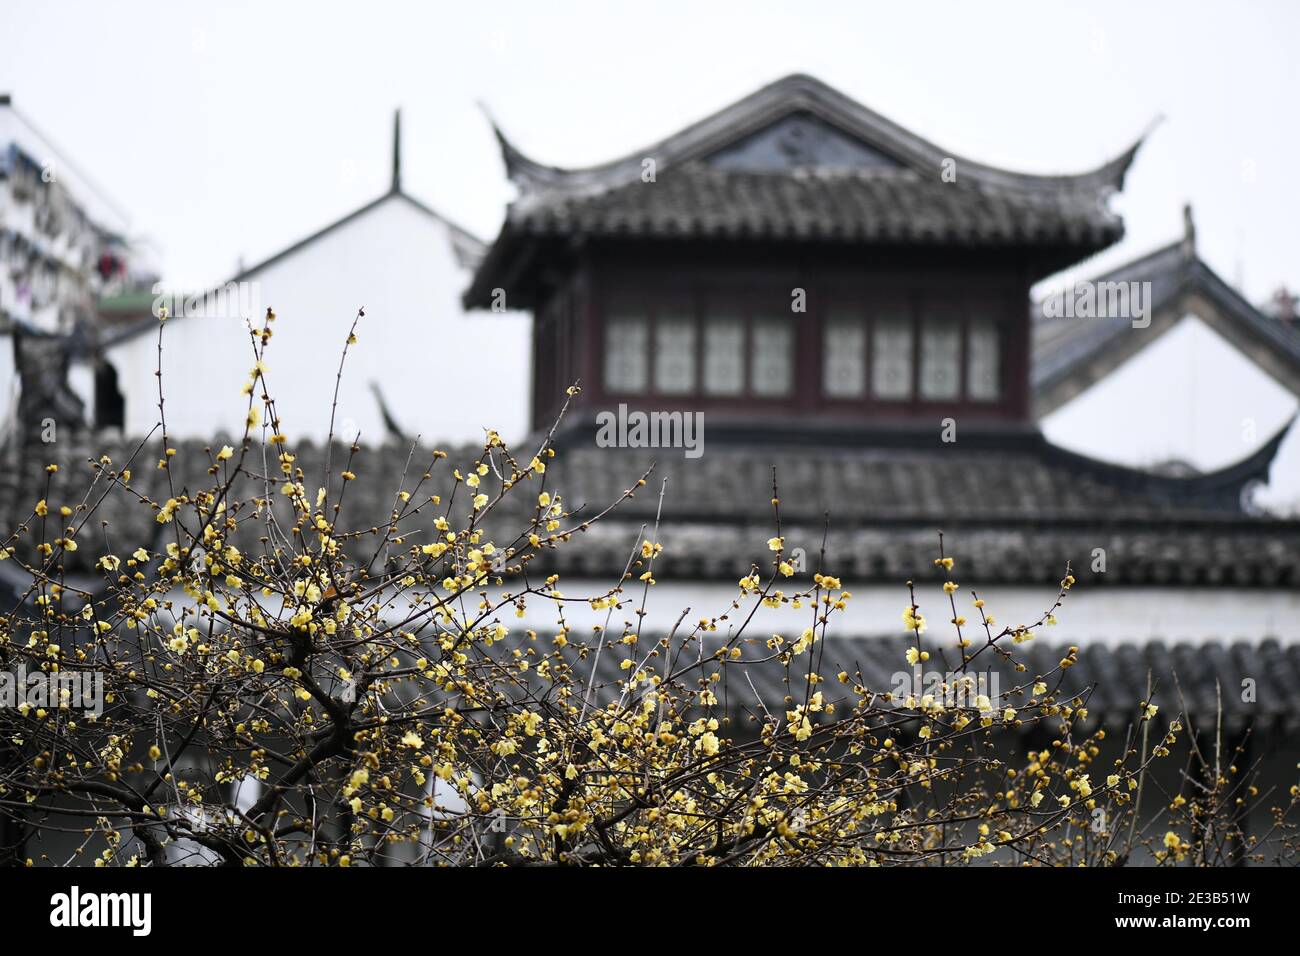 Nanjing, Nanjing, China. 18th Jan, 2021. Jiangsu, CHINA-On January 16, 2021, in the cold winter season, the wax plum blossoms in the Zhan Garden of Nanjing, known as the No.1 Garden of Jinling, attract many citizens and photography enthusiasts to enjoy the fragrance. Credit: SIPA Asia/ZUMA Wire/Alamy Live News Stock Photo